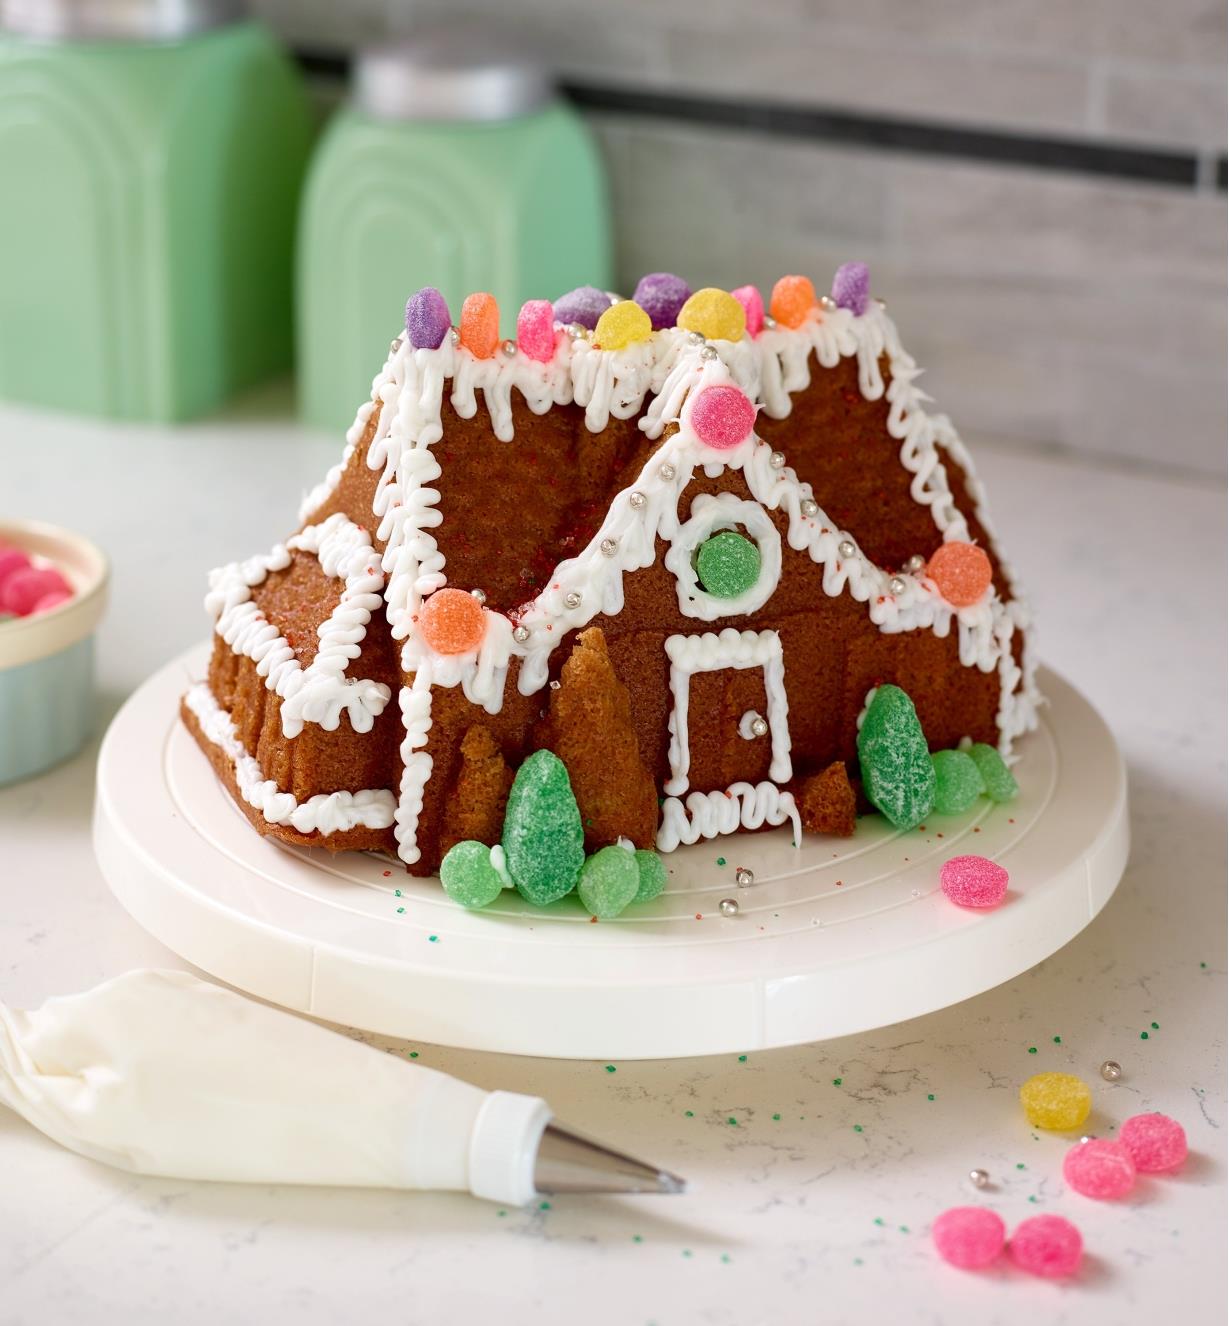 A gingerbread house cake decorated with icing and candy